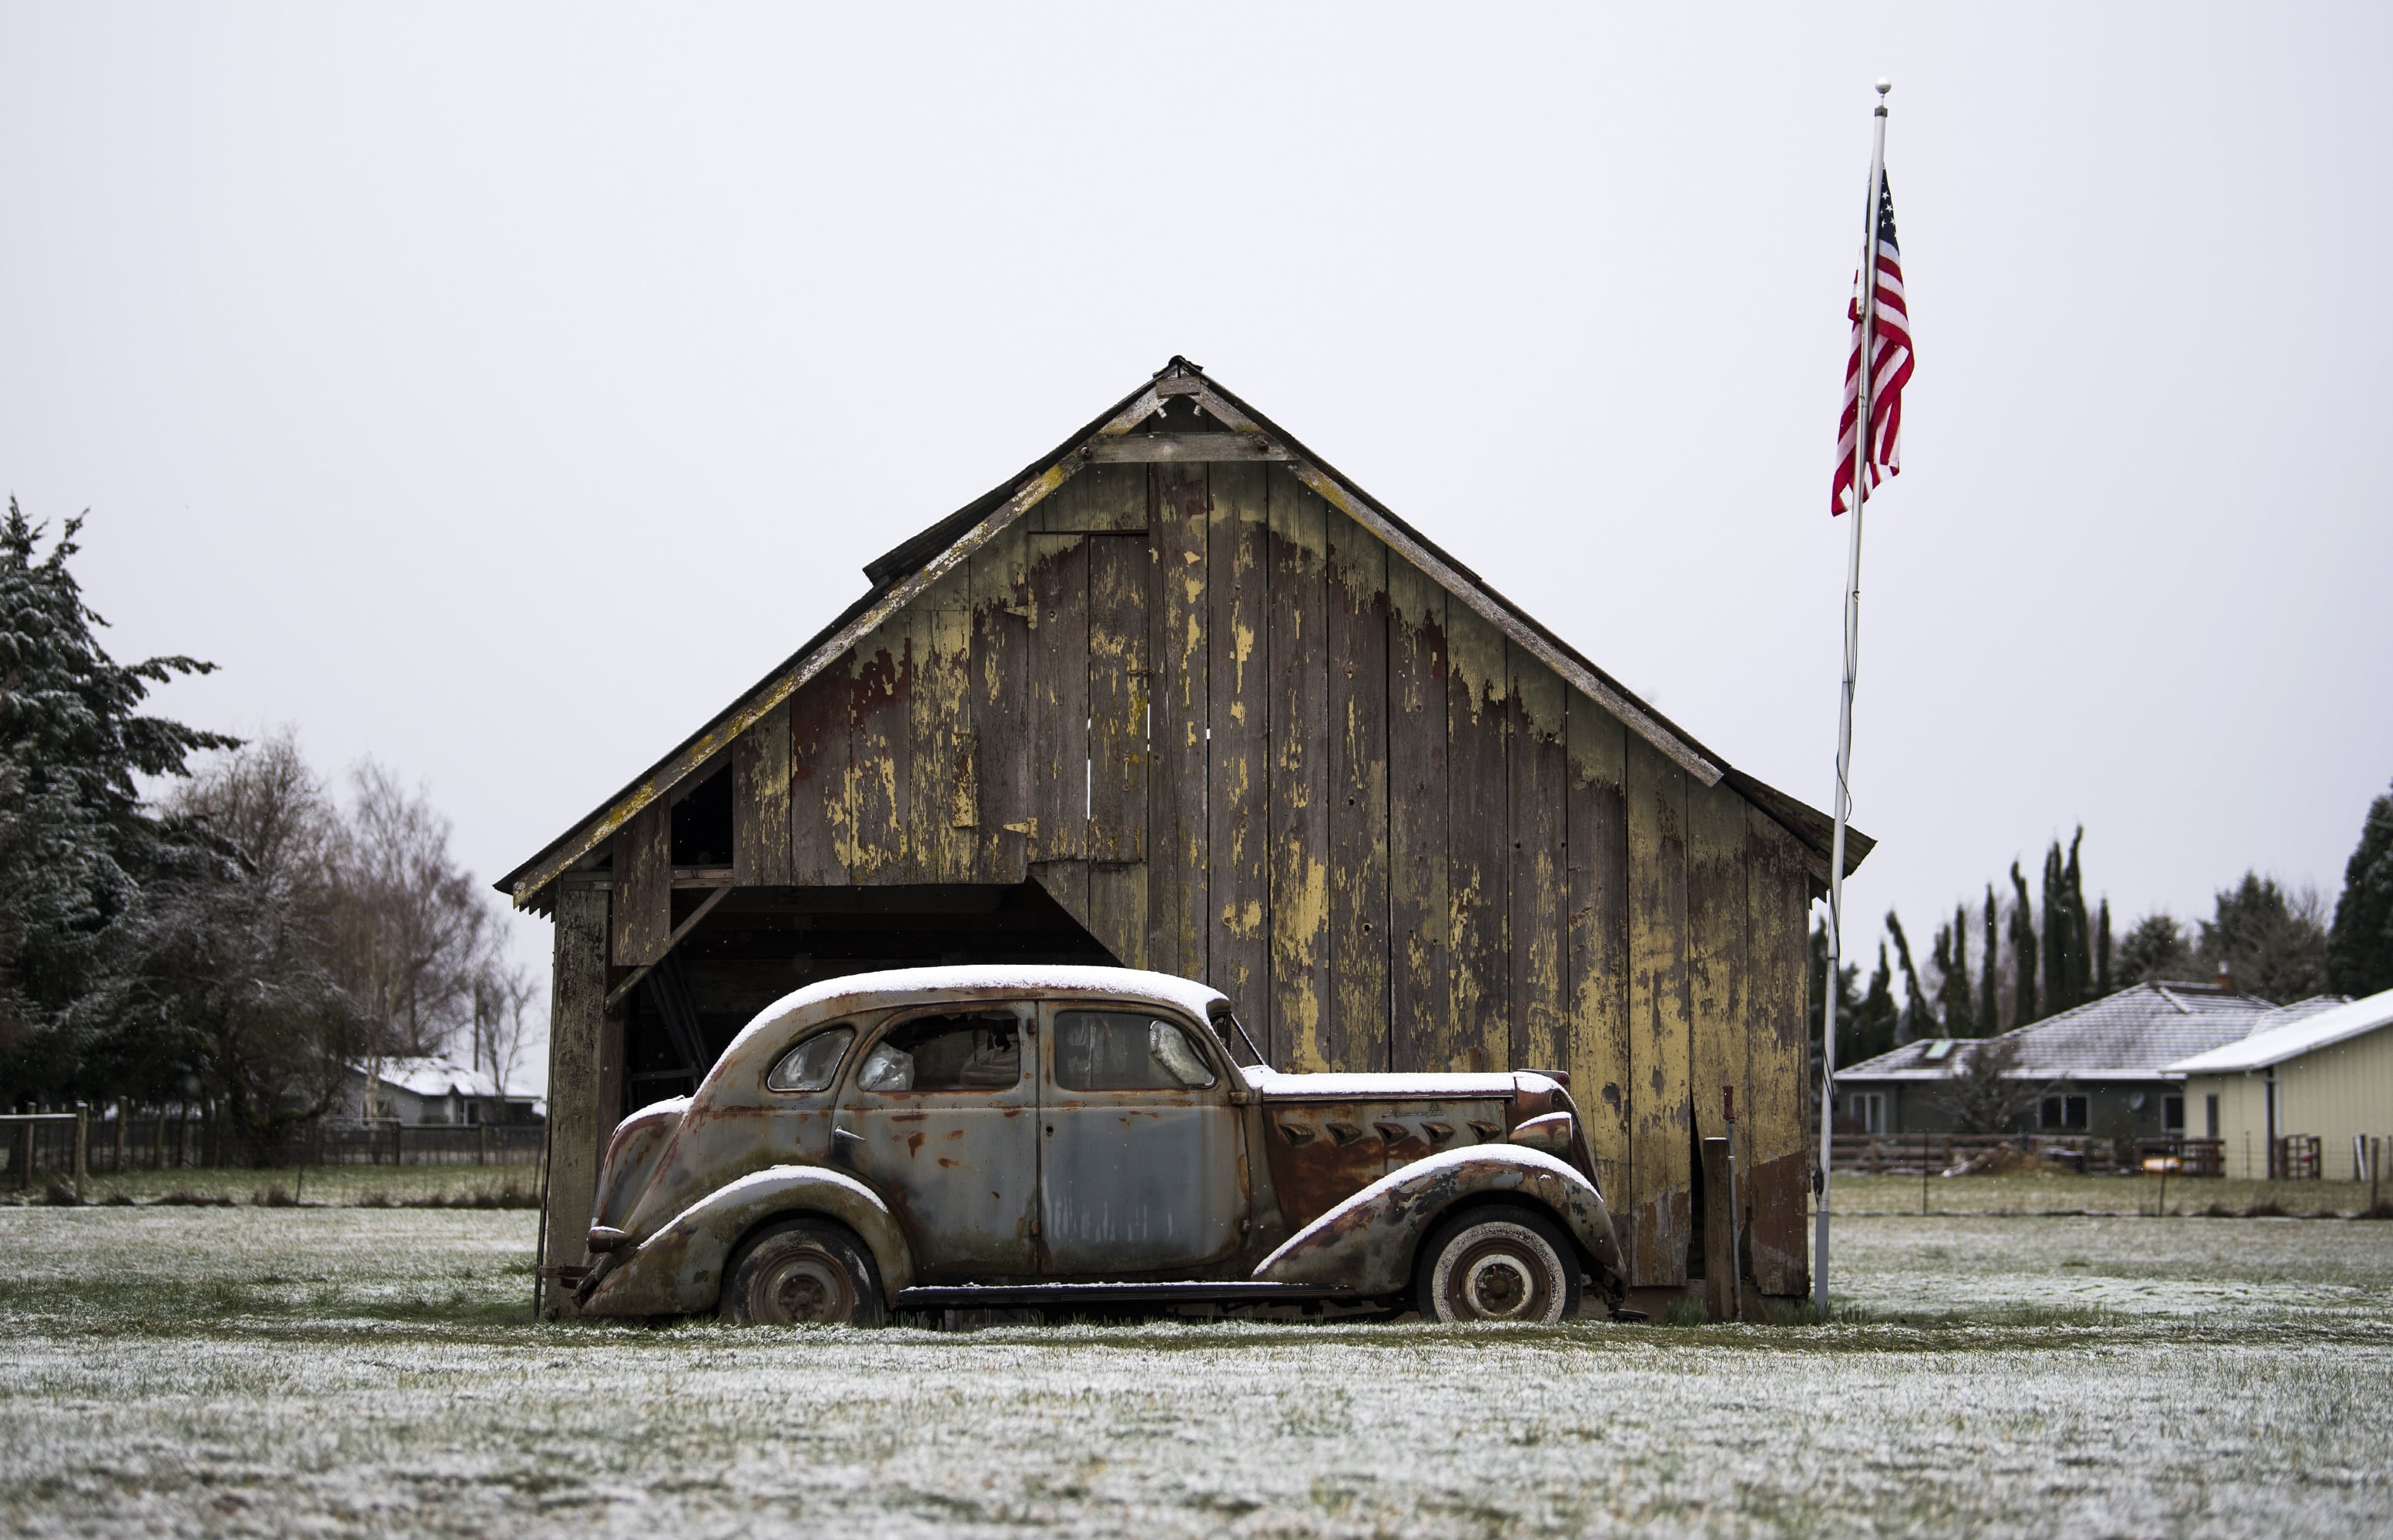 A dusting of snow rests on an old barn and car along NW 41st Avenue in Vancouver on Feb. 25, 2019.